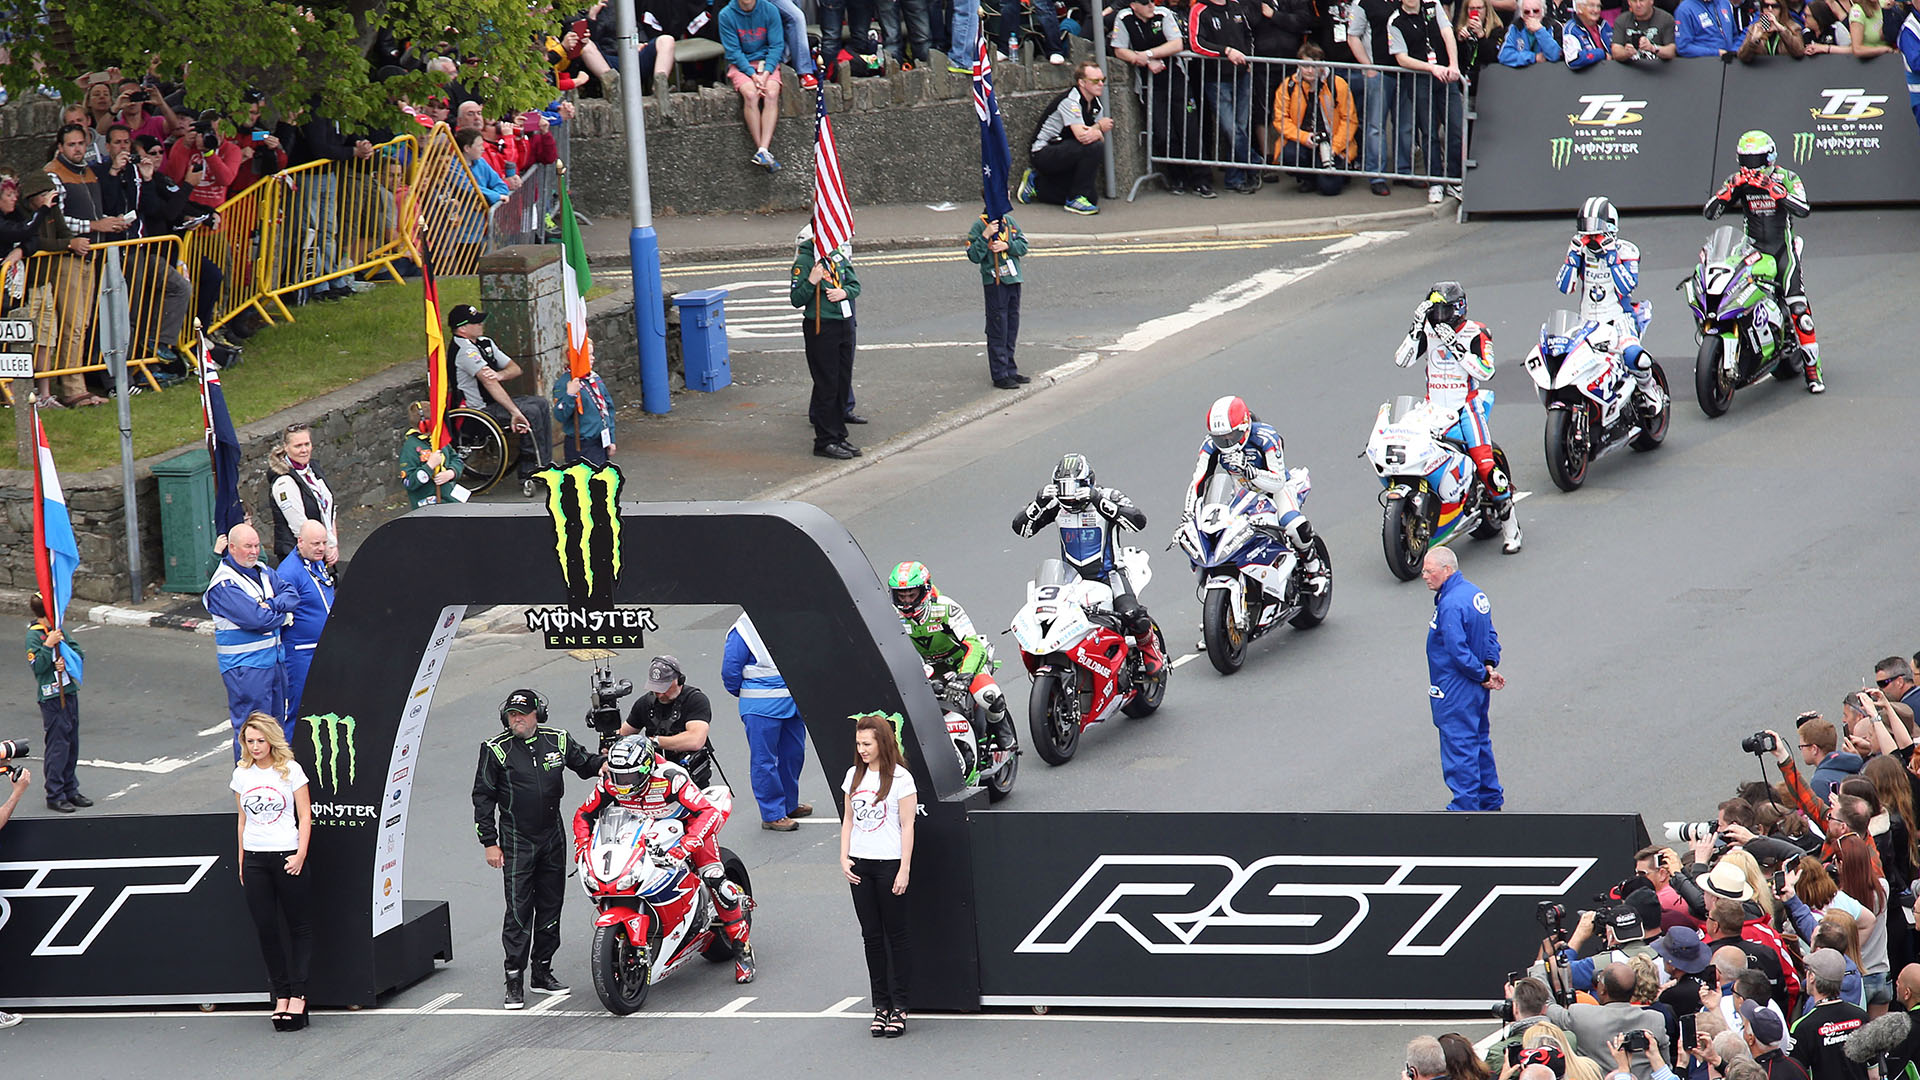 Everything you need to know about the 2017 Isle of Man TT races